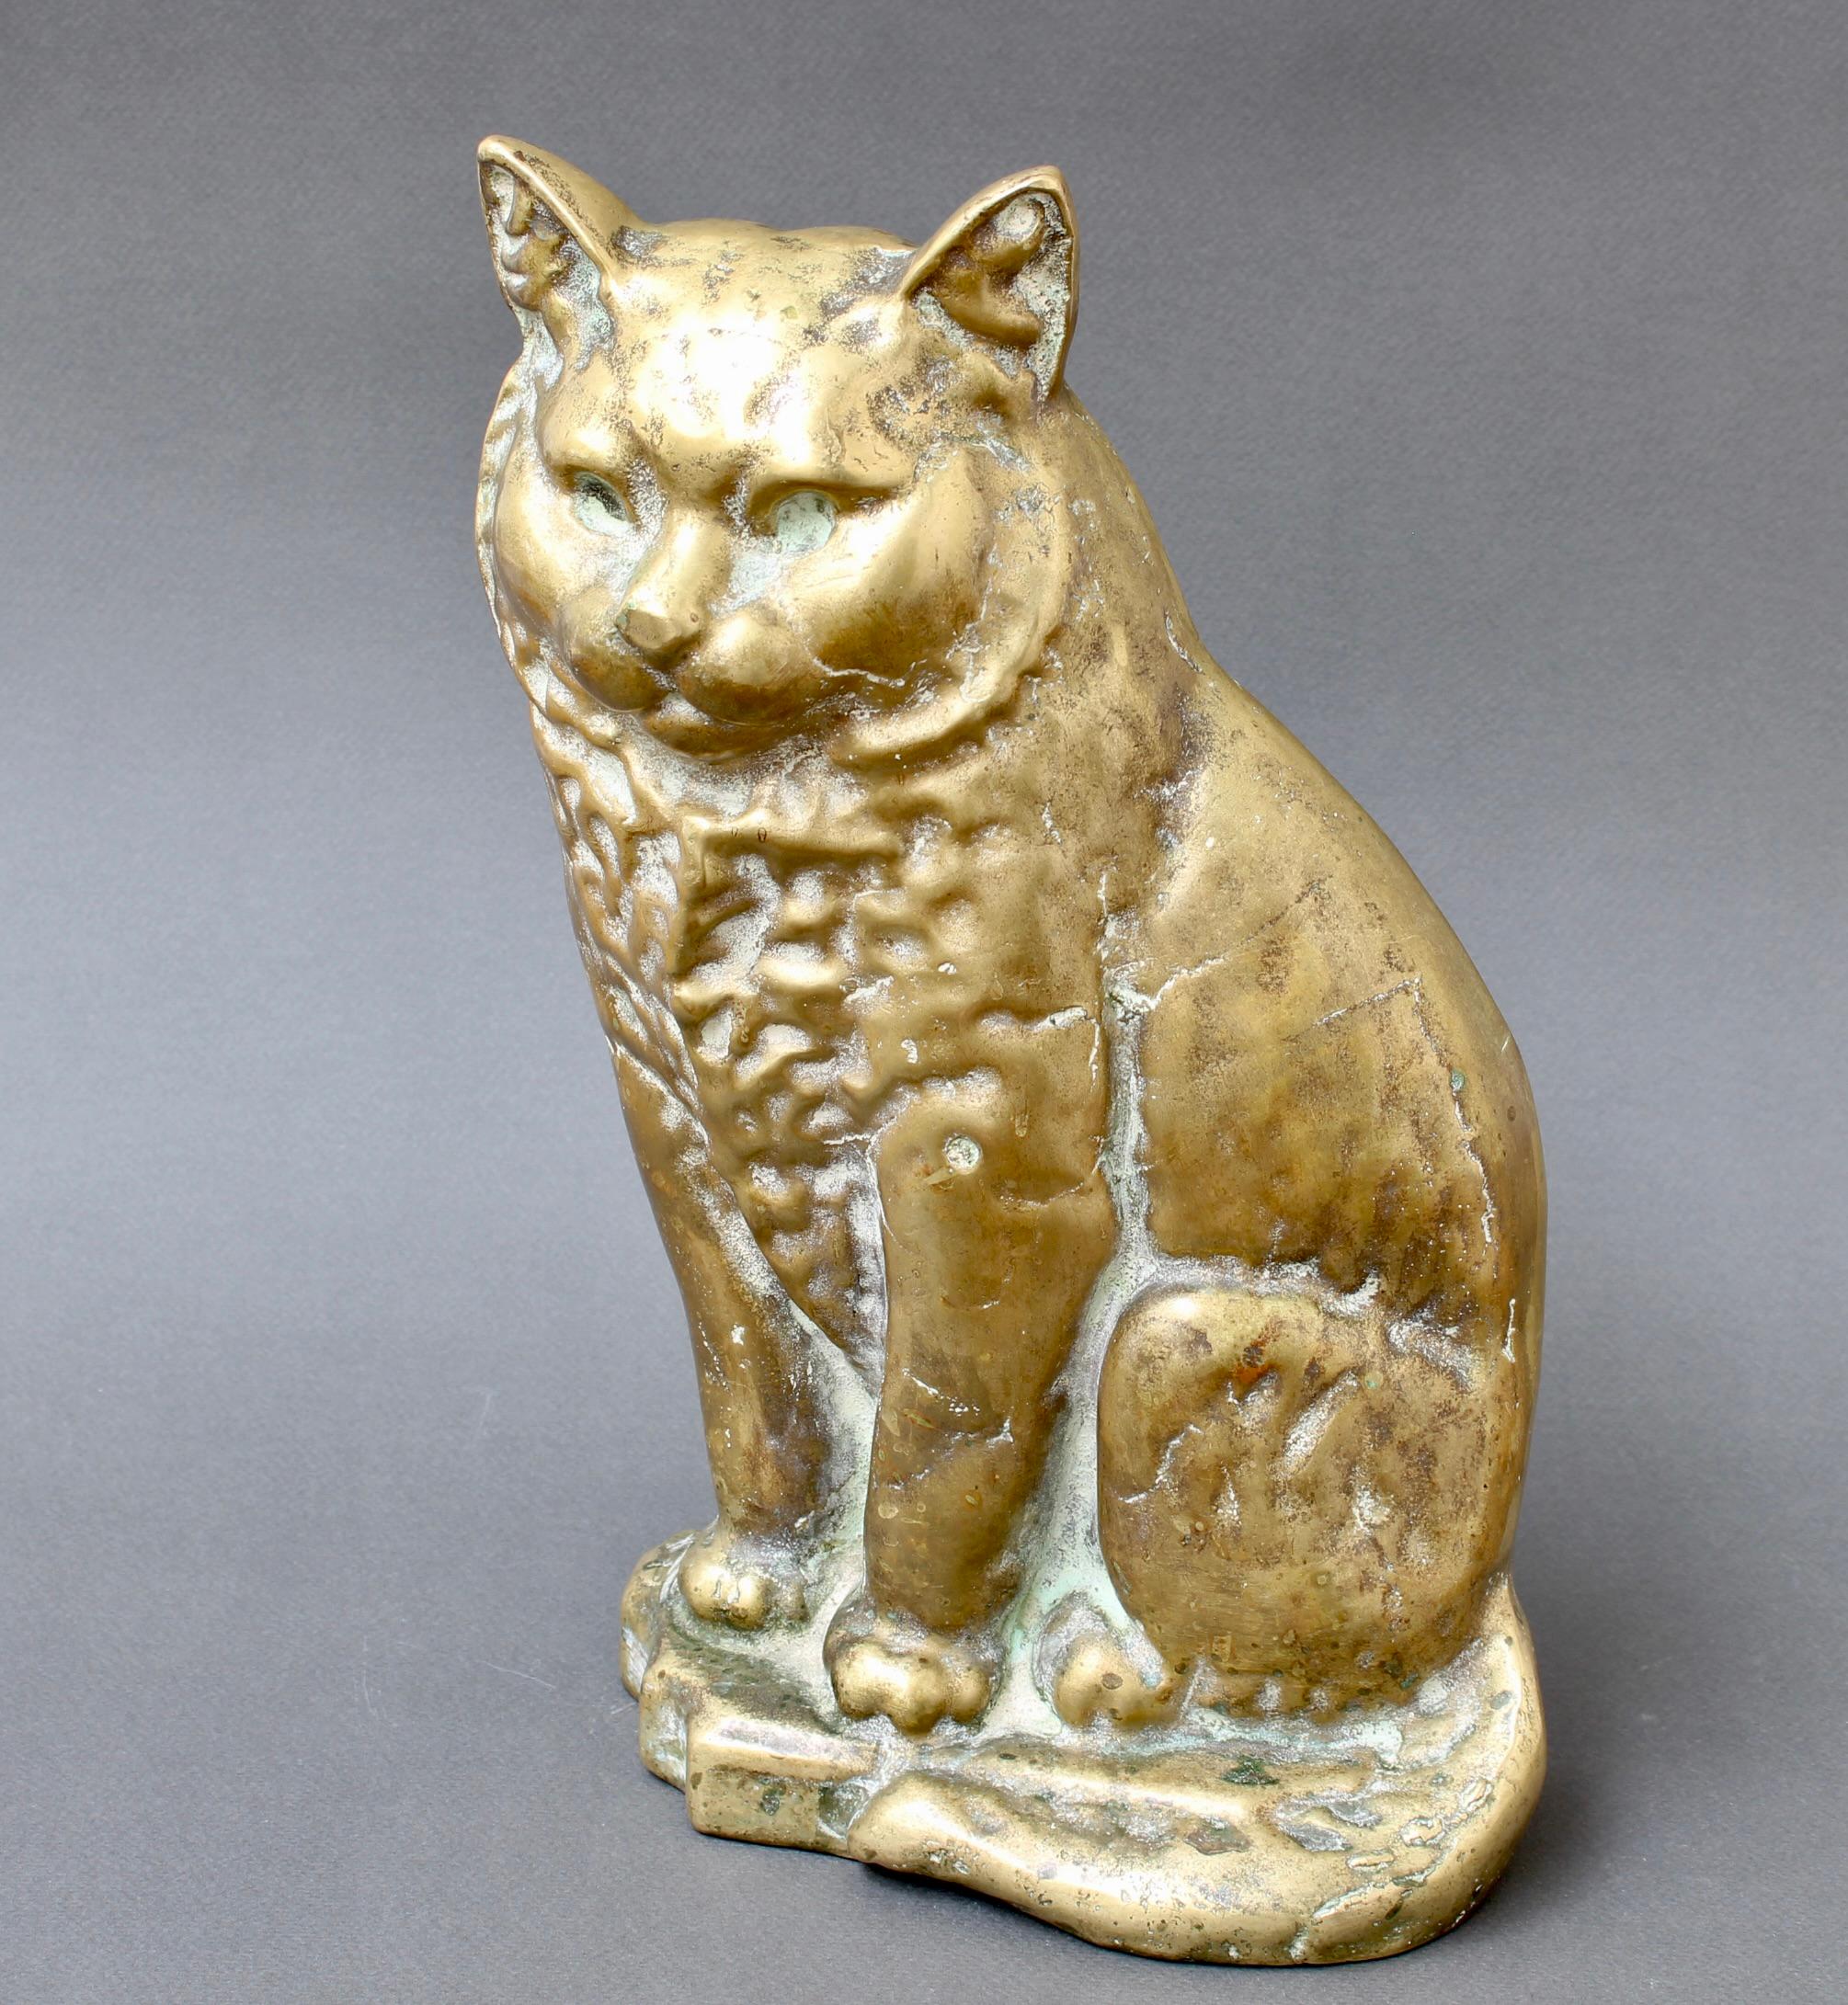 Antique figural Italian cast bronze cat (circa 1920s). This Italian marvel, born in the heart of the 1920s, is not just a statue; it's a portal to a bygone era where craftsmanship and admiration for nature converged. The patina, like the passage of